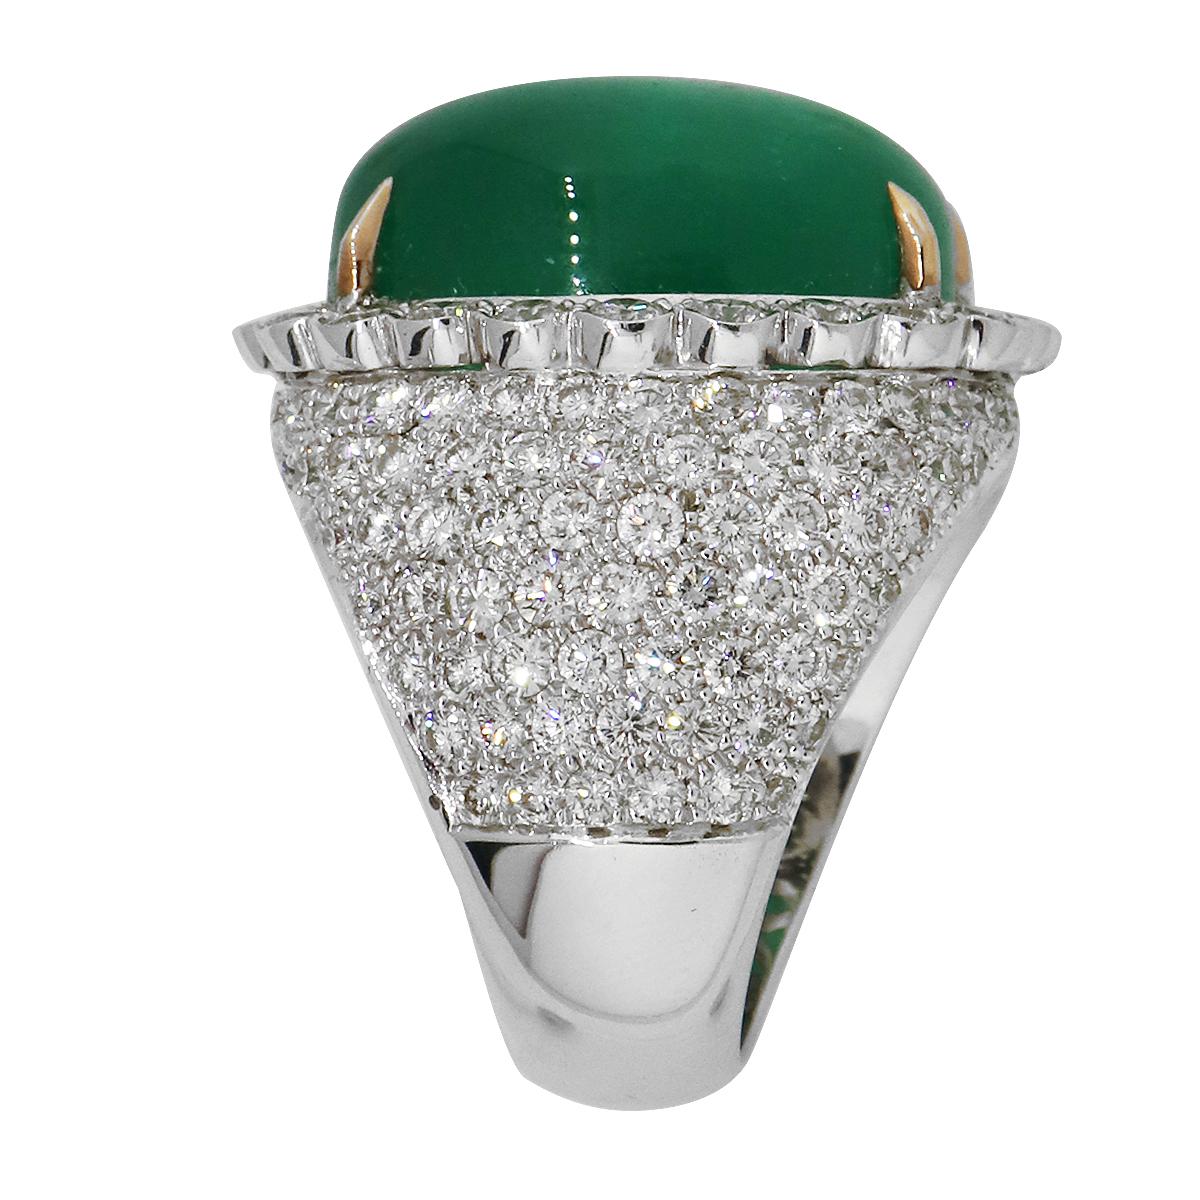 Material: 18k White Gold 
Diamond Details: Approximately 4ctw round brilliant diamonds. Diamonds are G/H in color and VS in clarity.
Gemstone Details: Approximately 15ctw emerald gemstone. 
Ring Size: 9.5
Total Weight: 28.7g (18.5dwt)
Measurements: